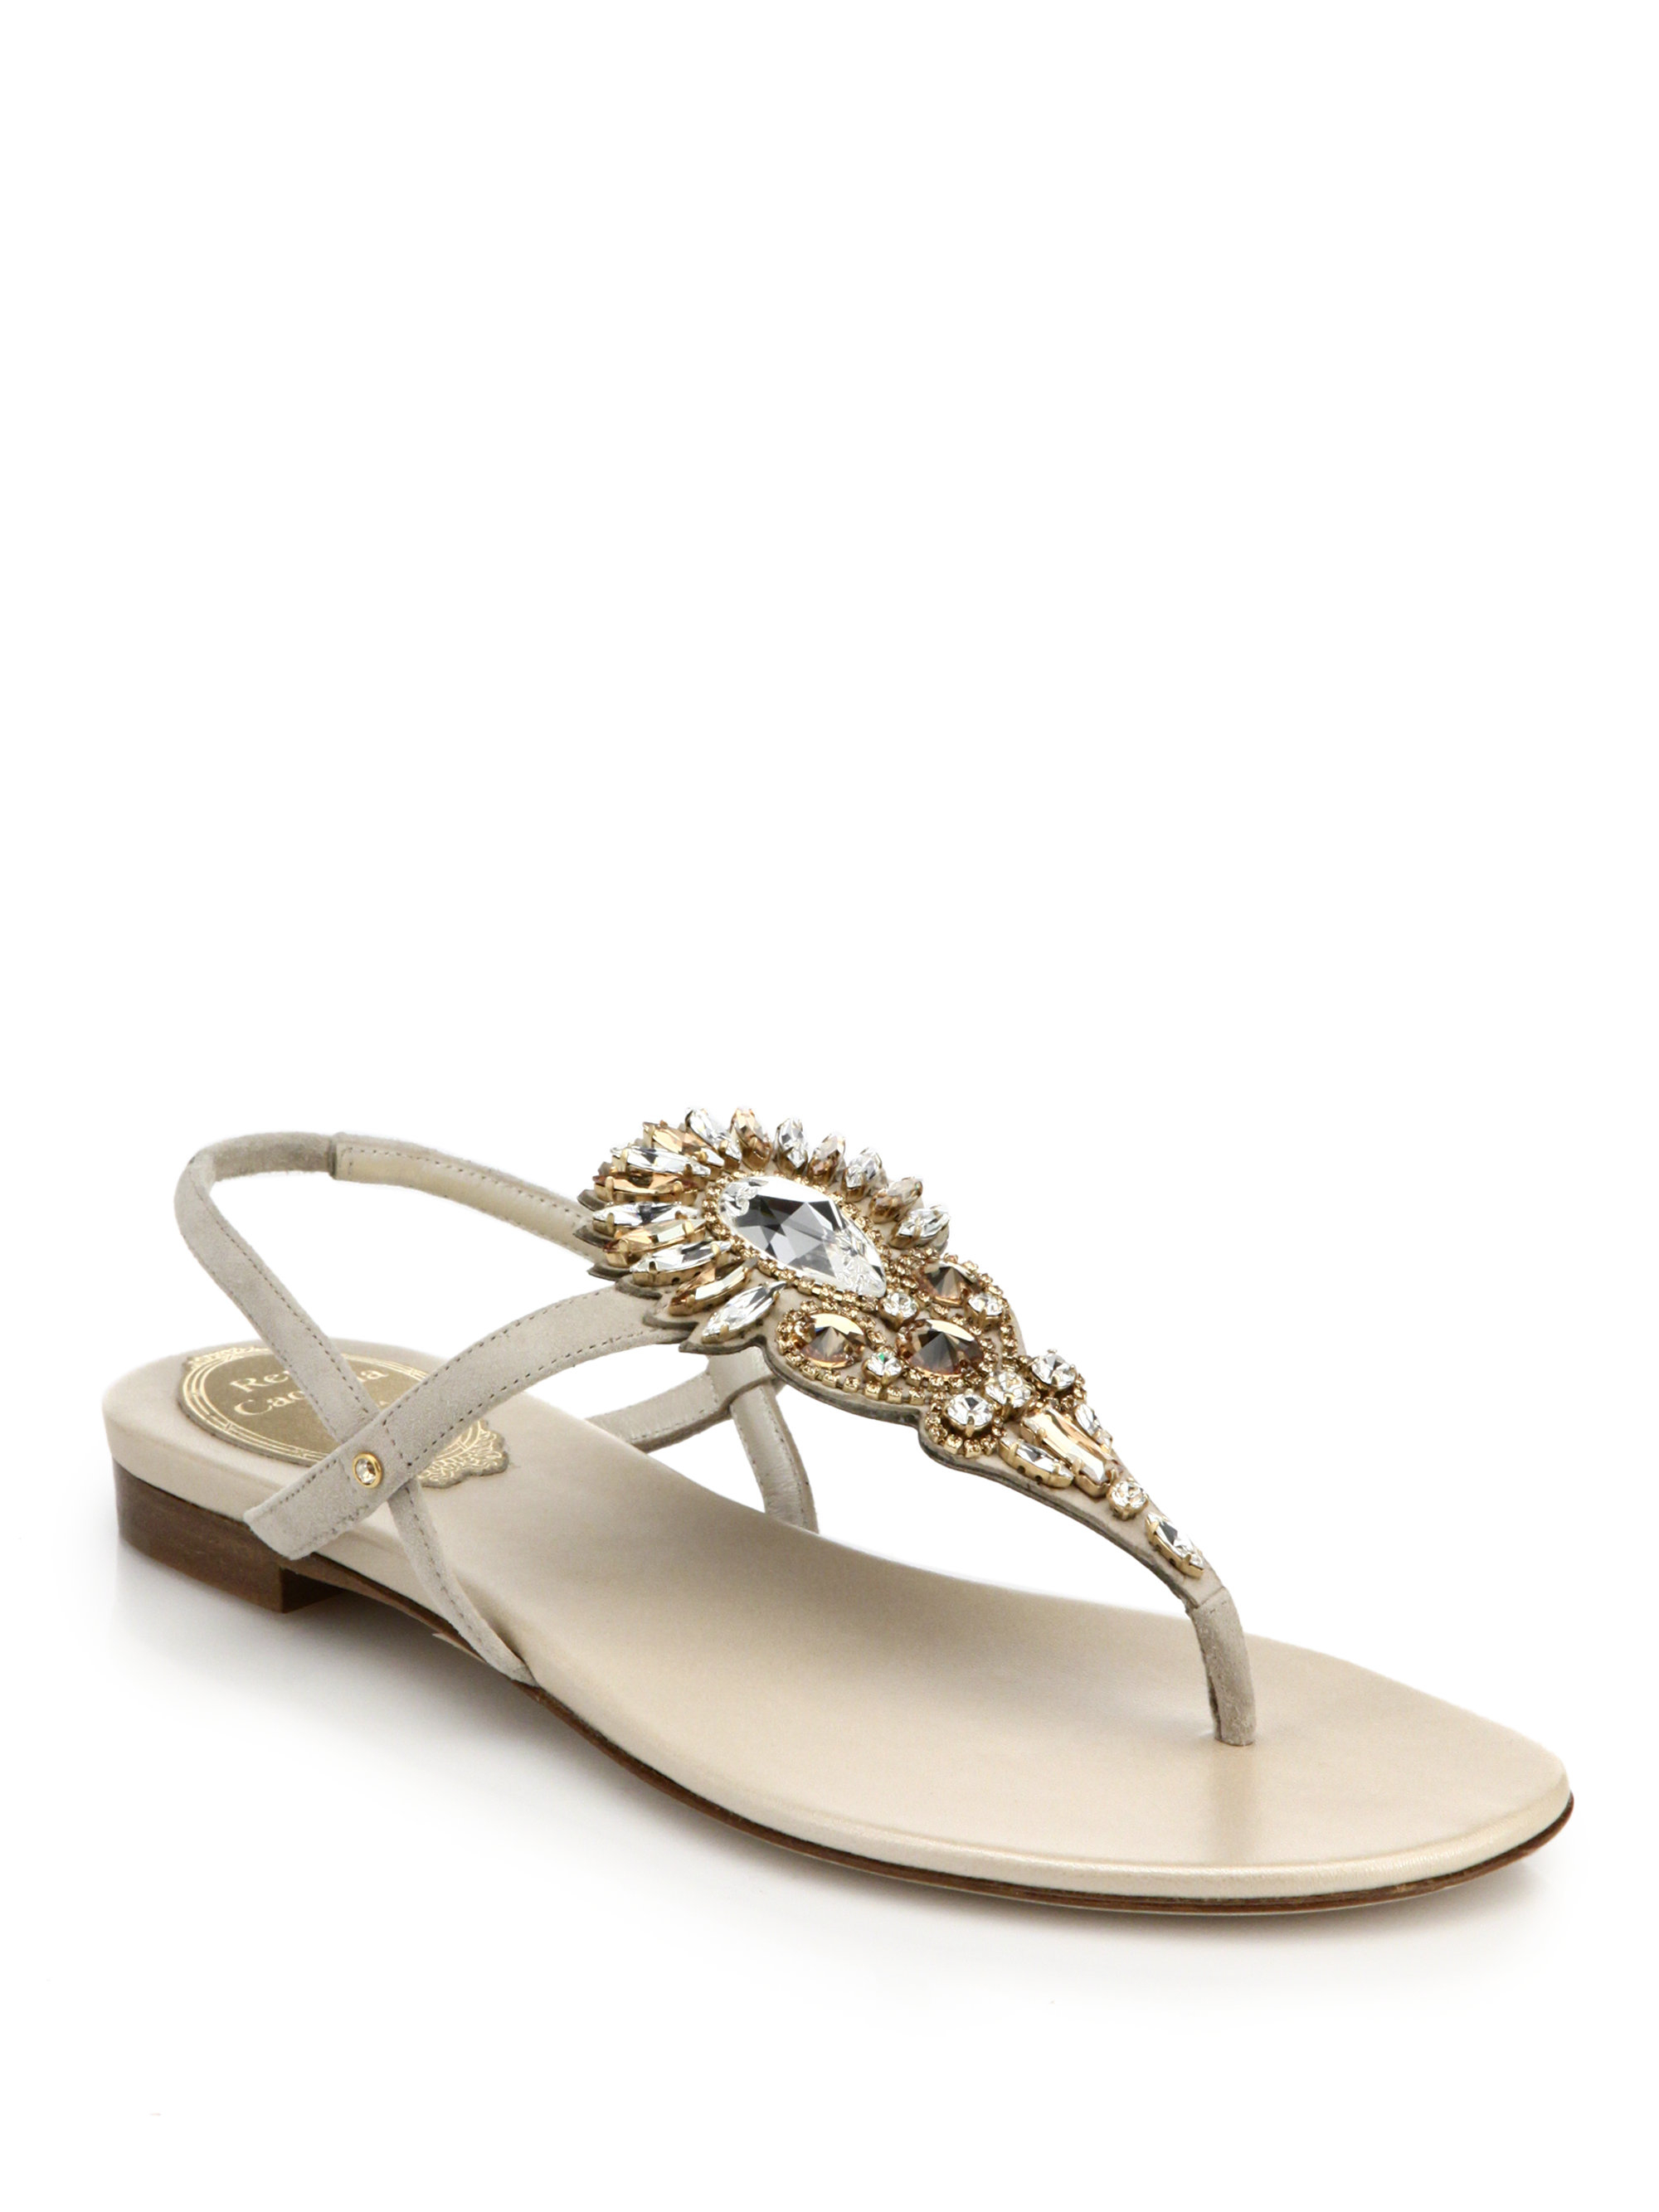 Lyst - Rene Caovilla Bejeweled Leather Thong Sandals in Metallic